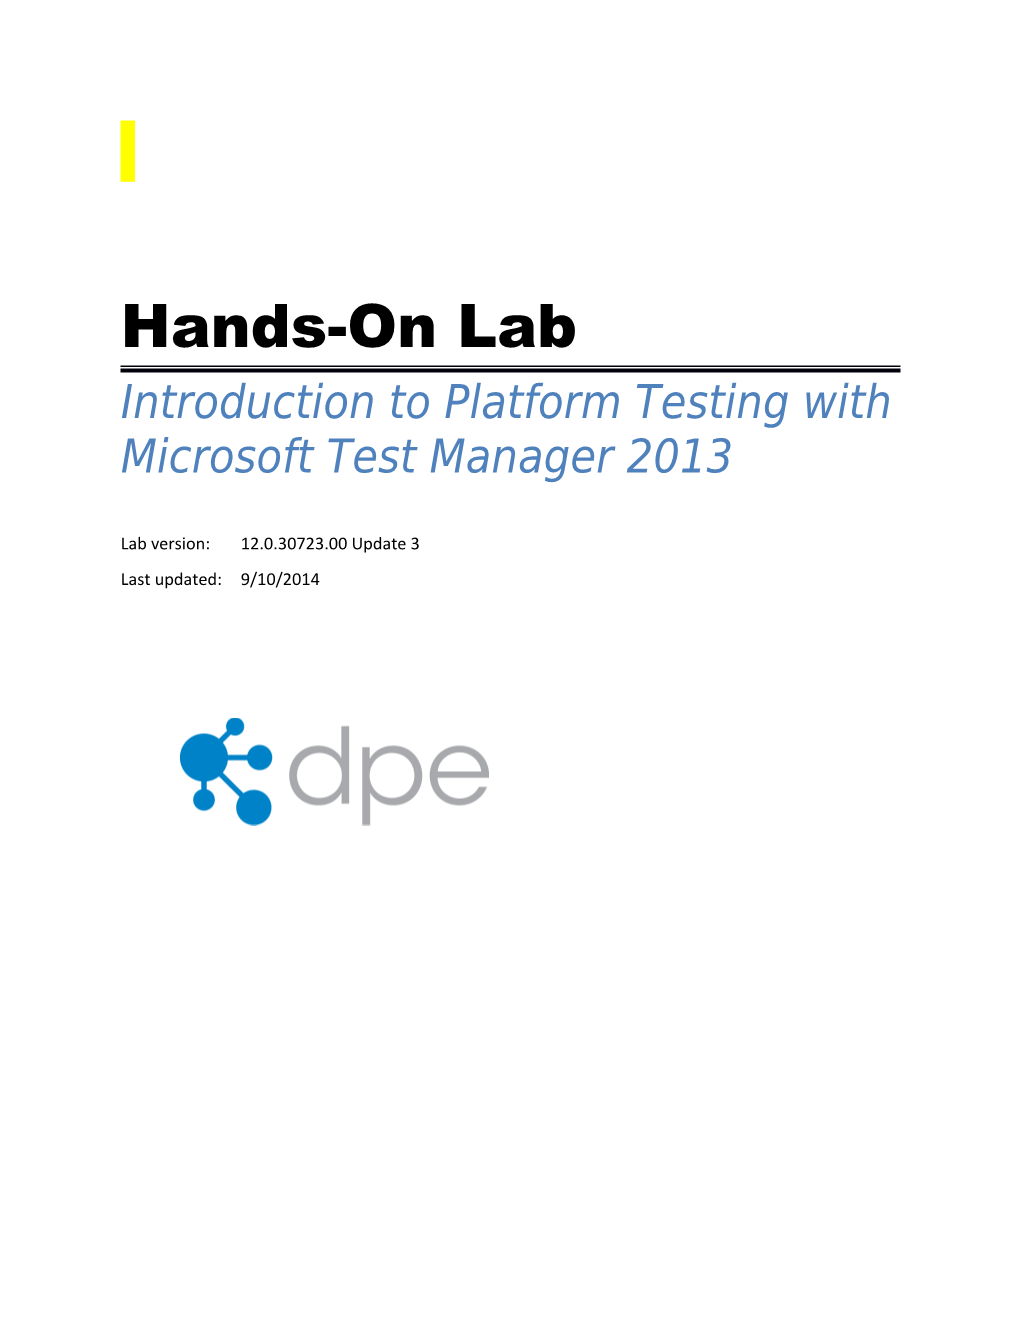 Introduction to Platform Testing with Microsoft Test Manager 2013